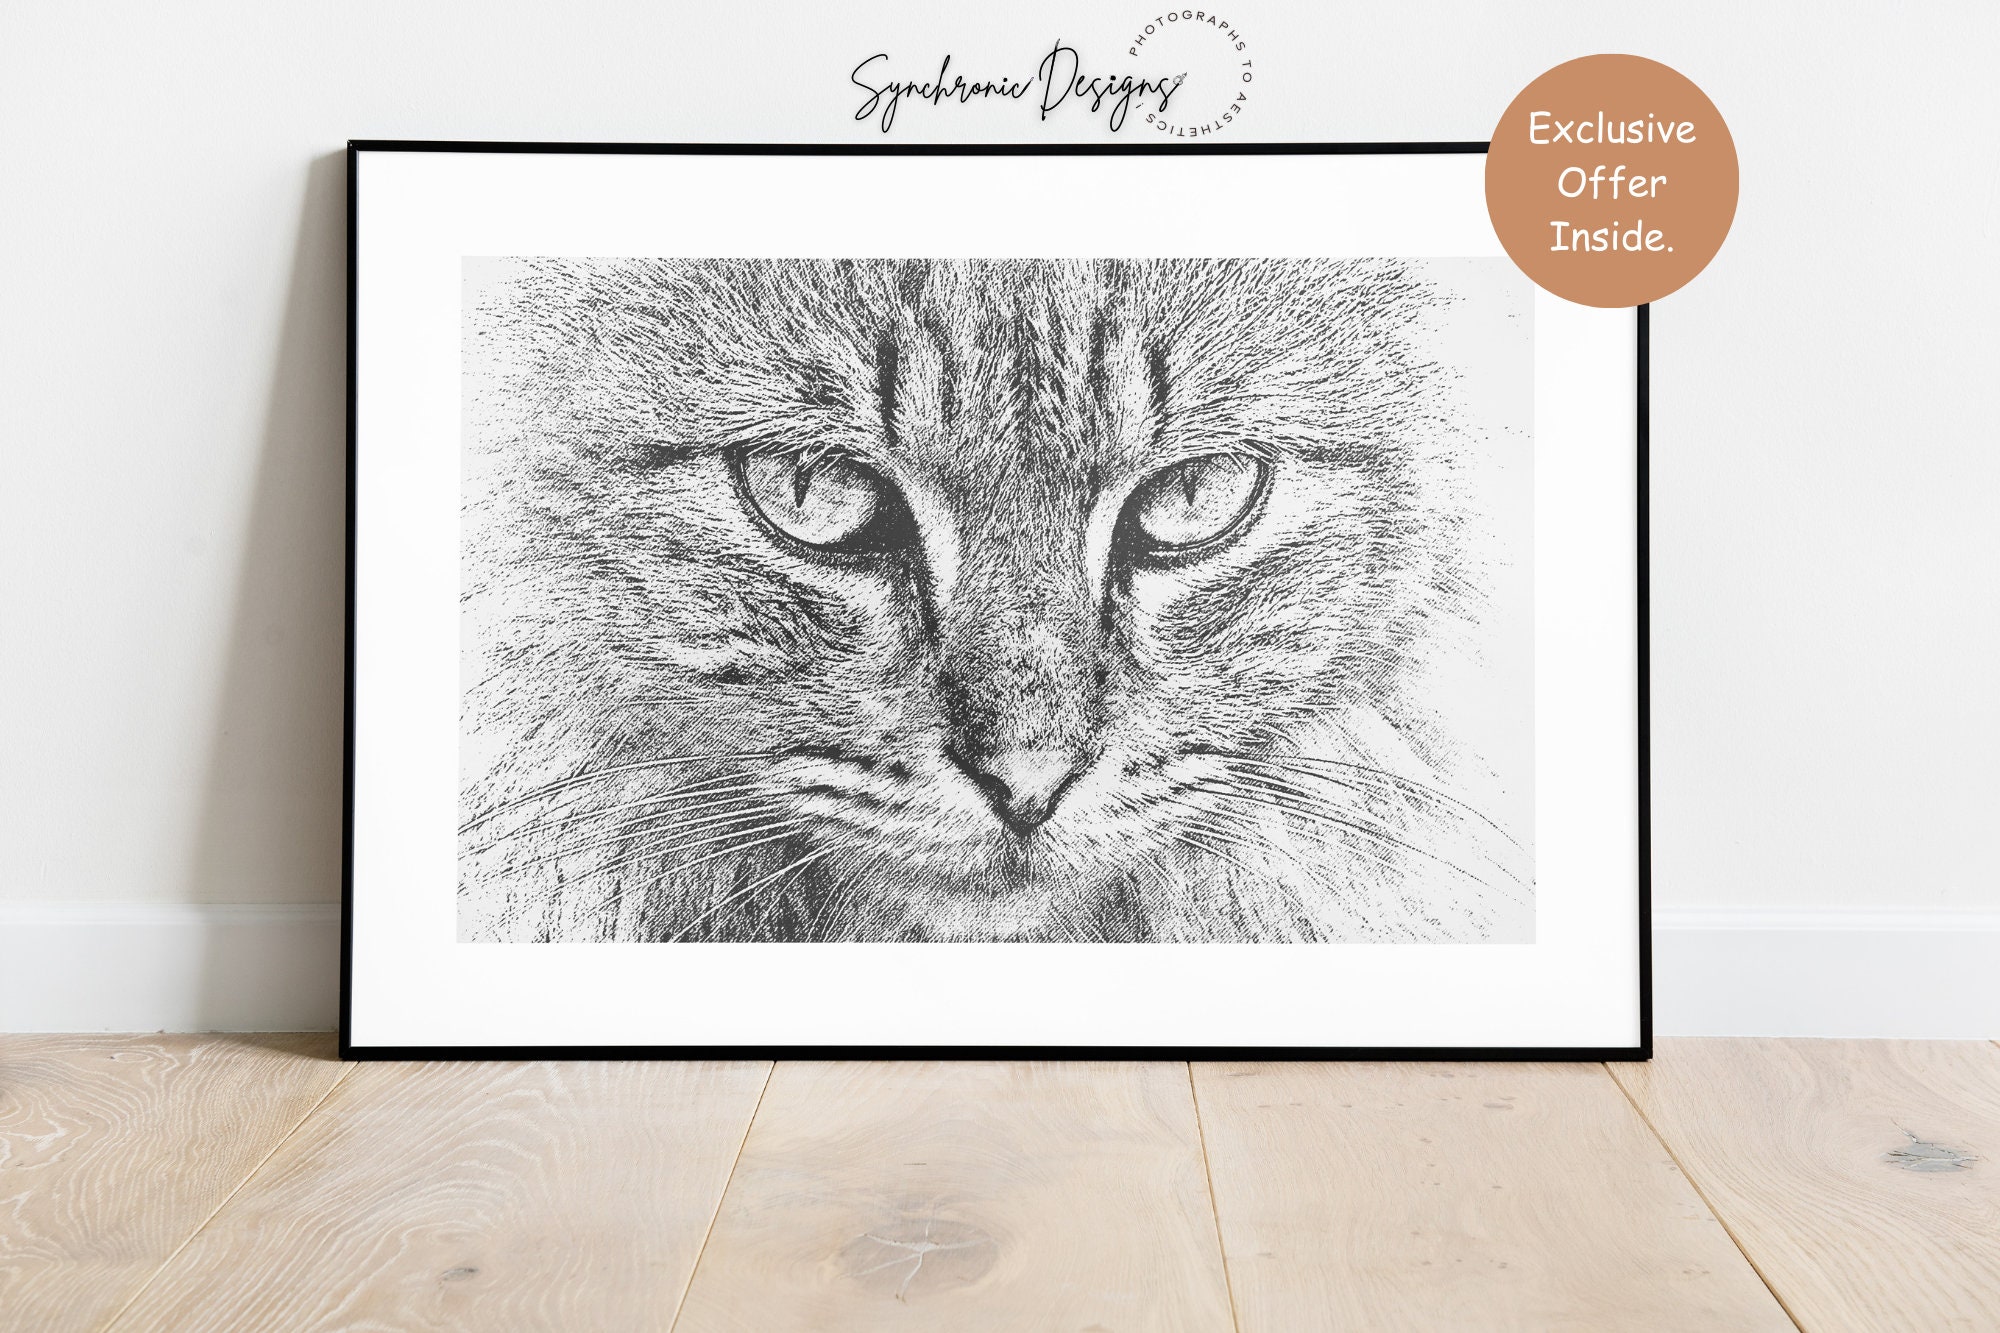 Cat pencil drawing  Art Board Print for Sale by Pencil-Art